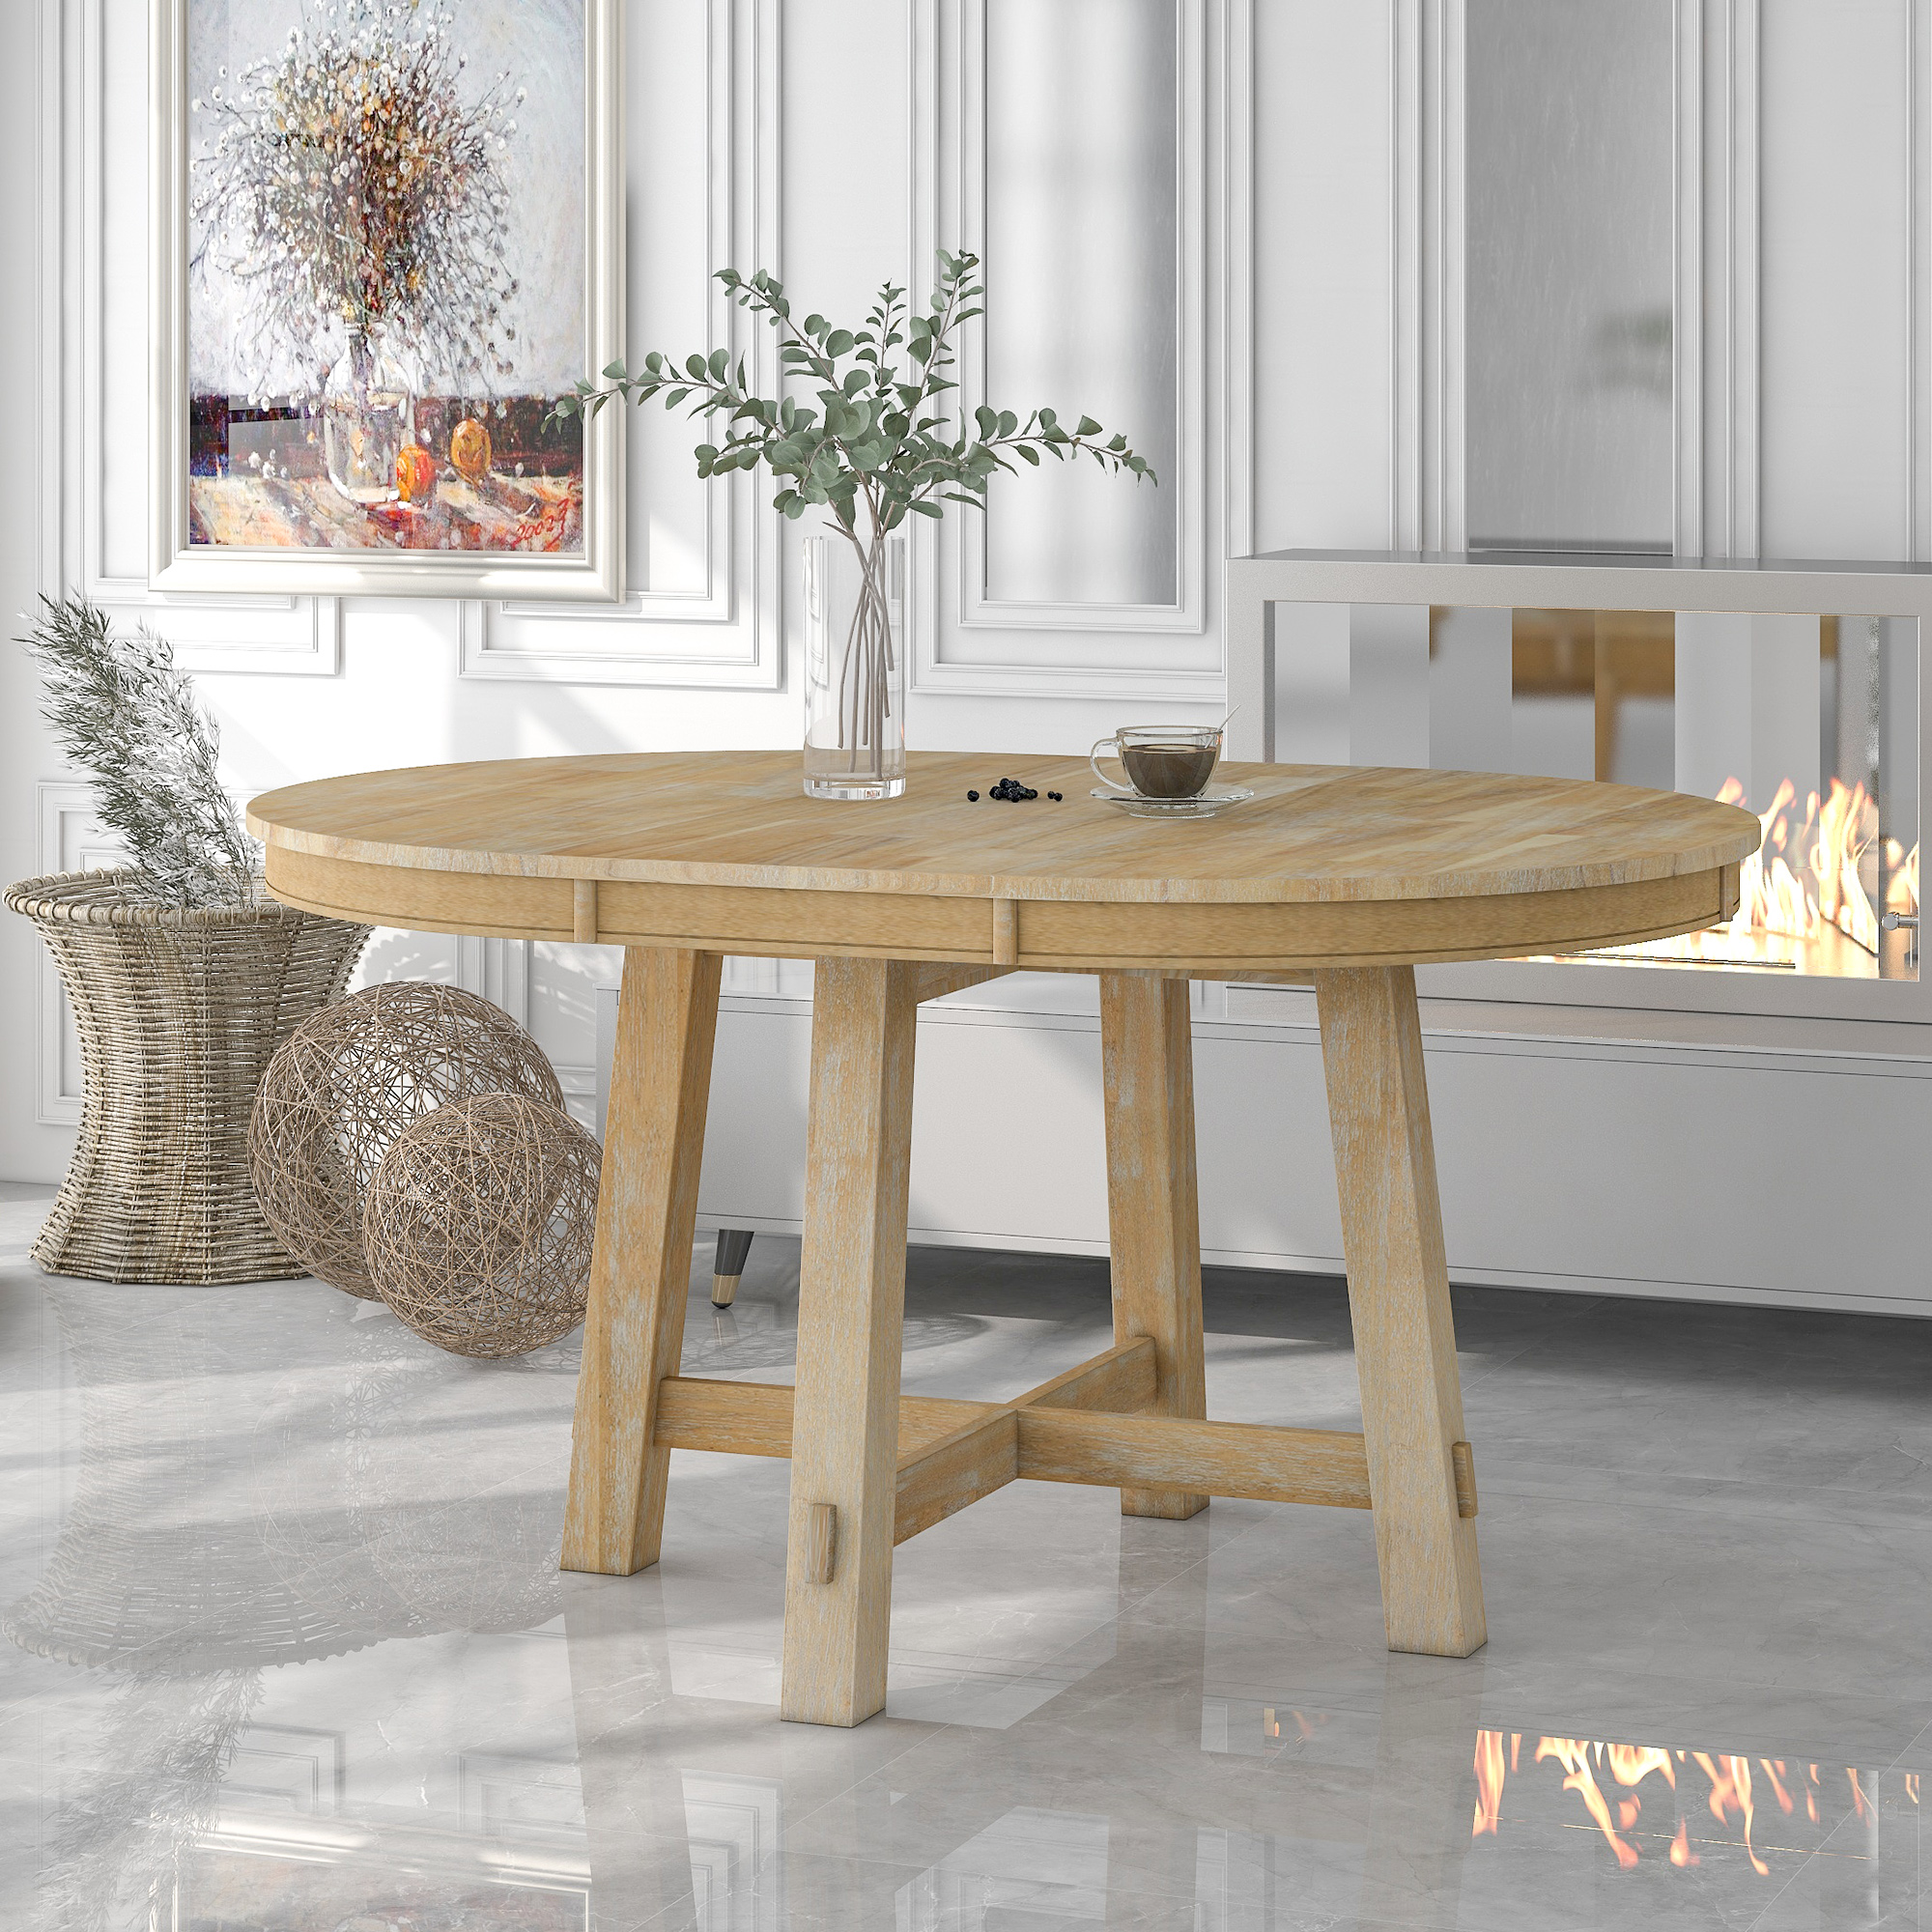 TREXM Farmhouse Round Extendable Dining Table with 16' Leaf Wood Kitchen Table (Natural Wood Wash)